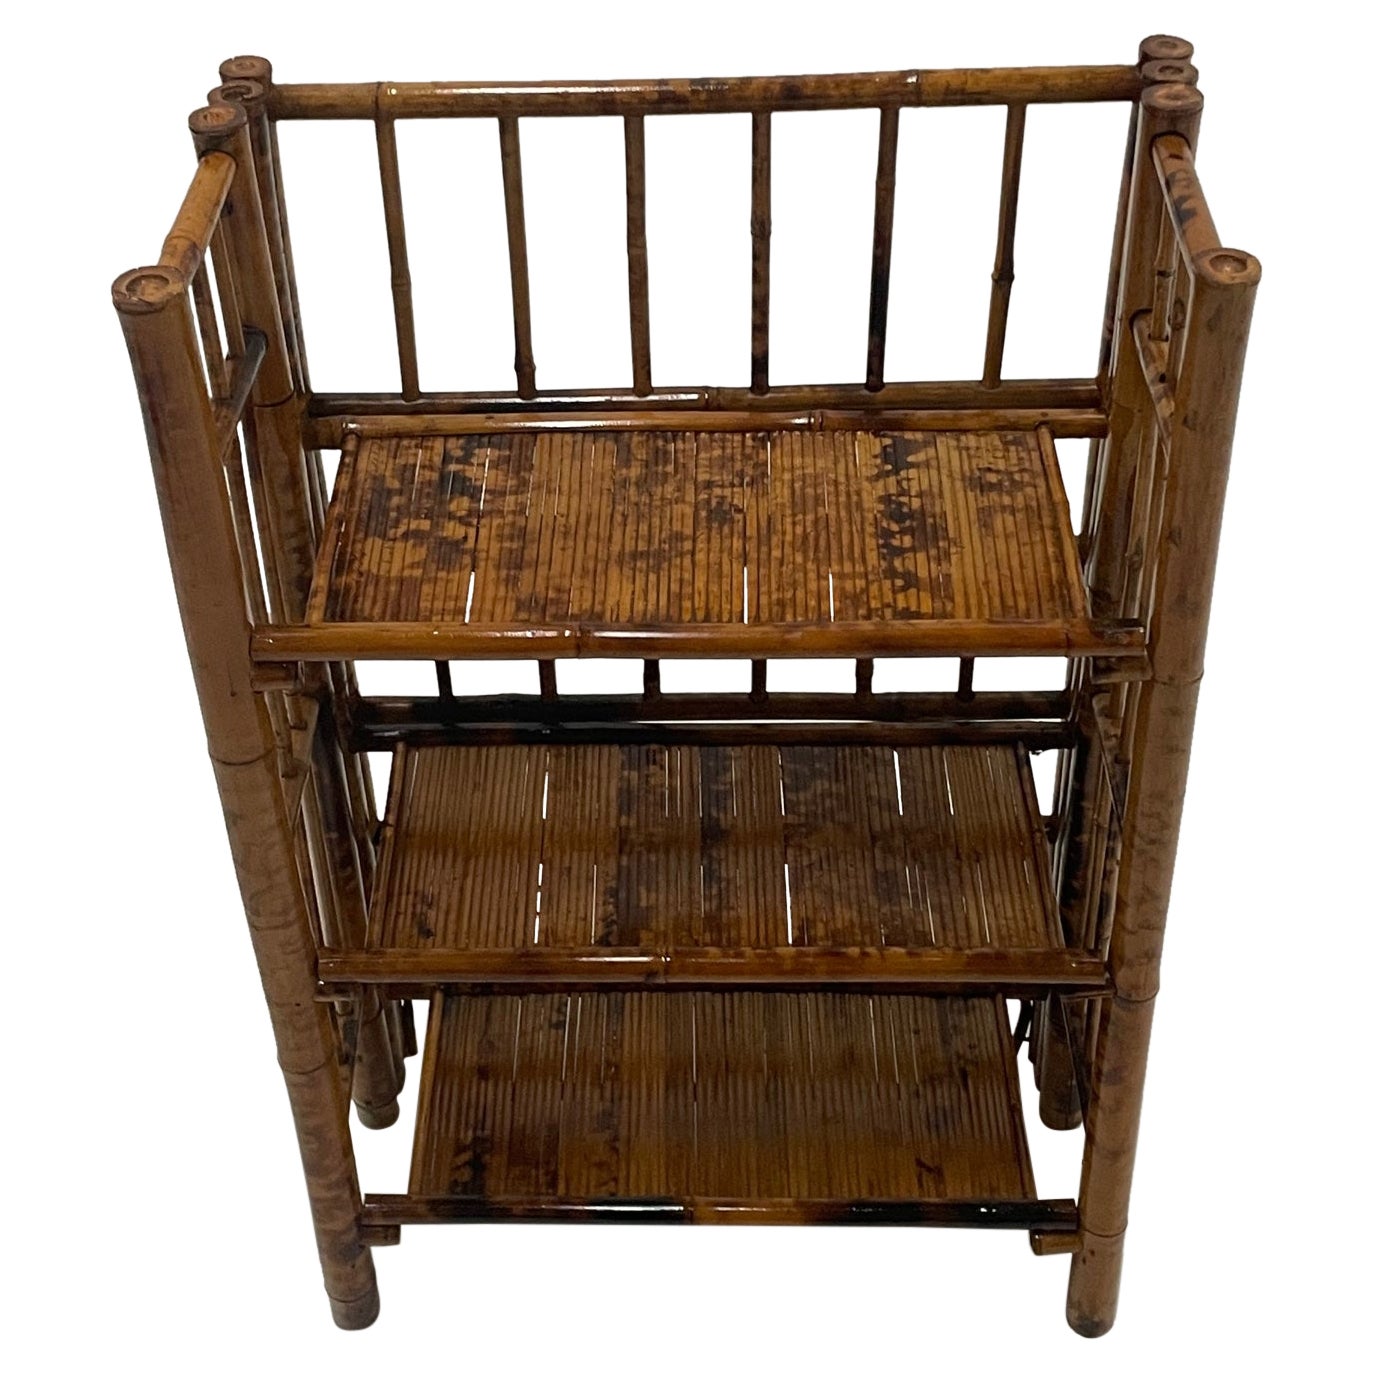 Chic Diminutive Bamboo Bookshelf with a Faux Tortoise Finish For Sale